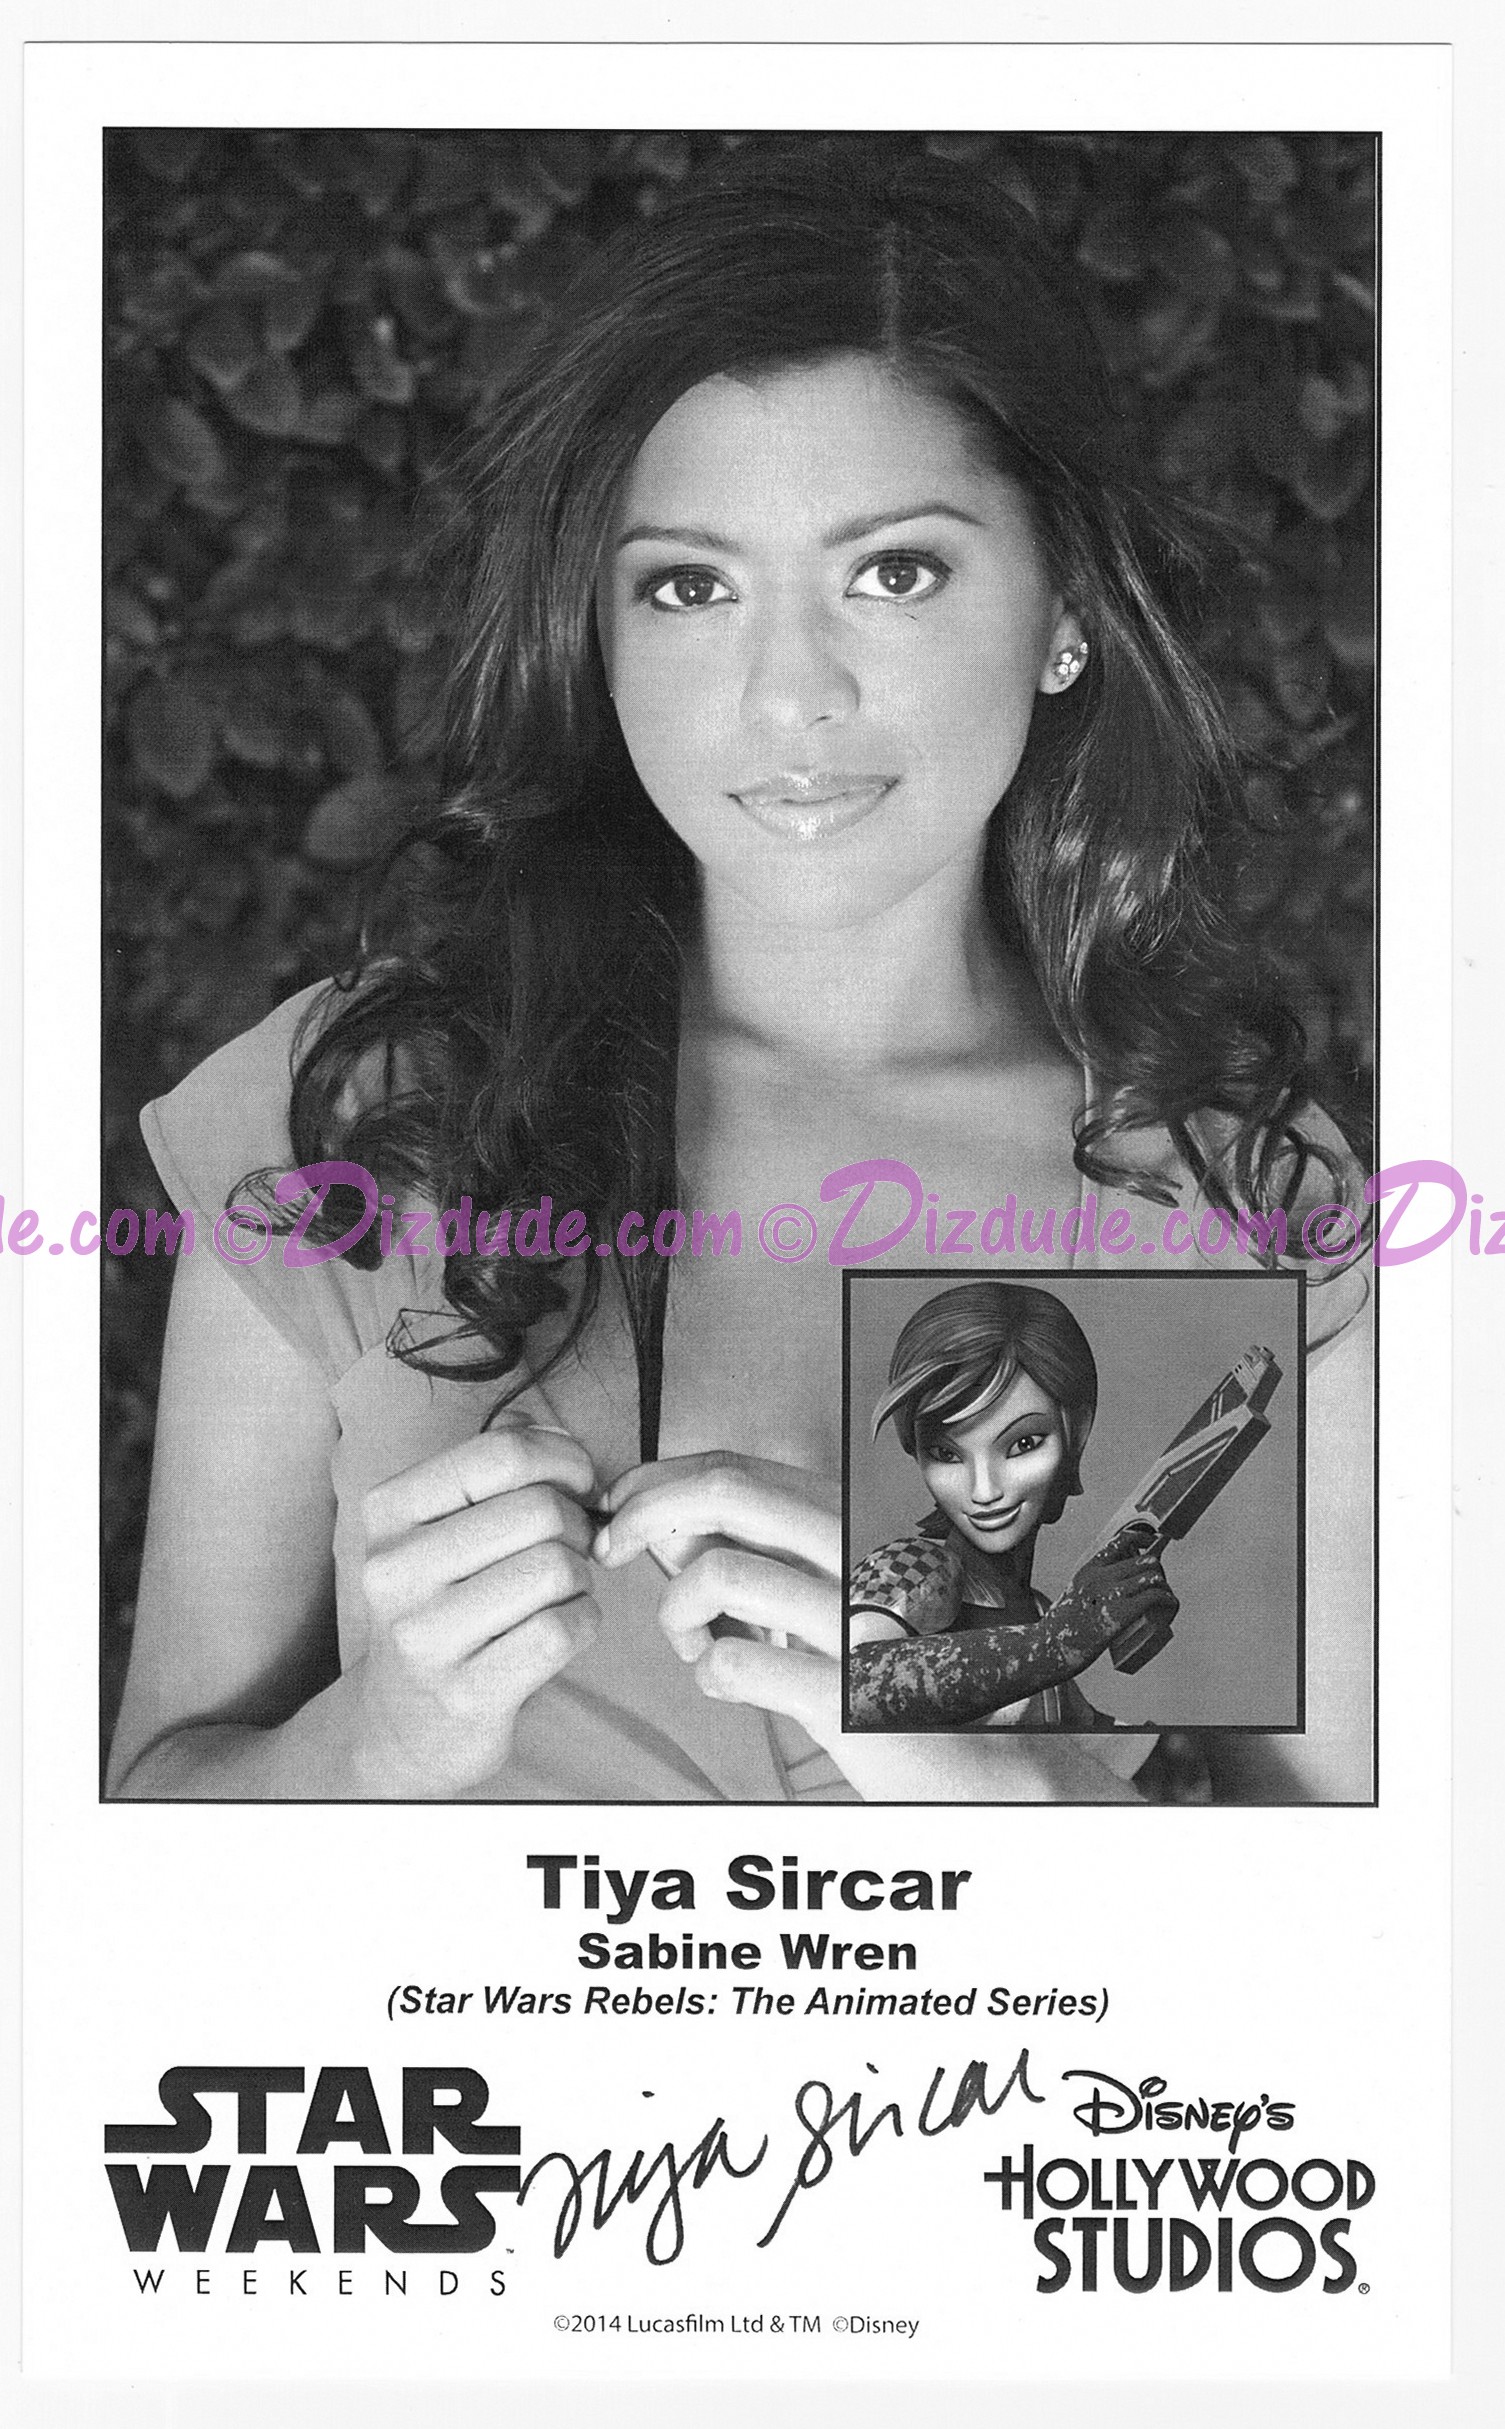 Tiya Sircar the voice of Sabine Wren Presigned Official Star Wars Weekends 2014 Celebrity Collector Photo